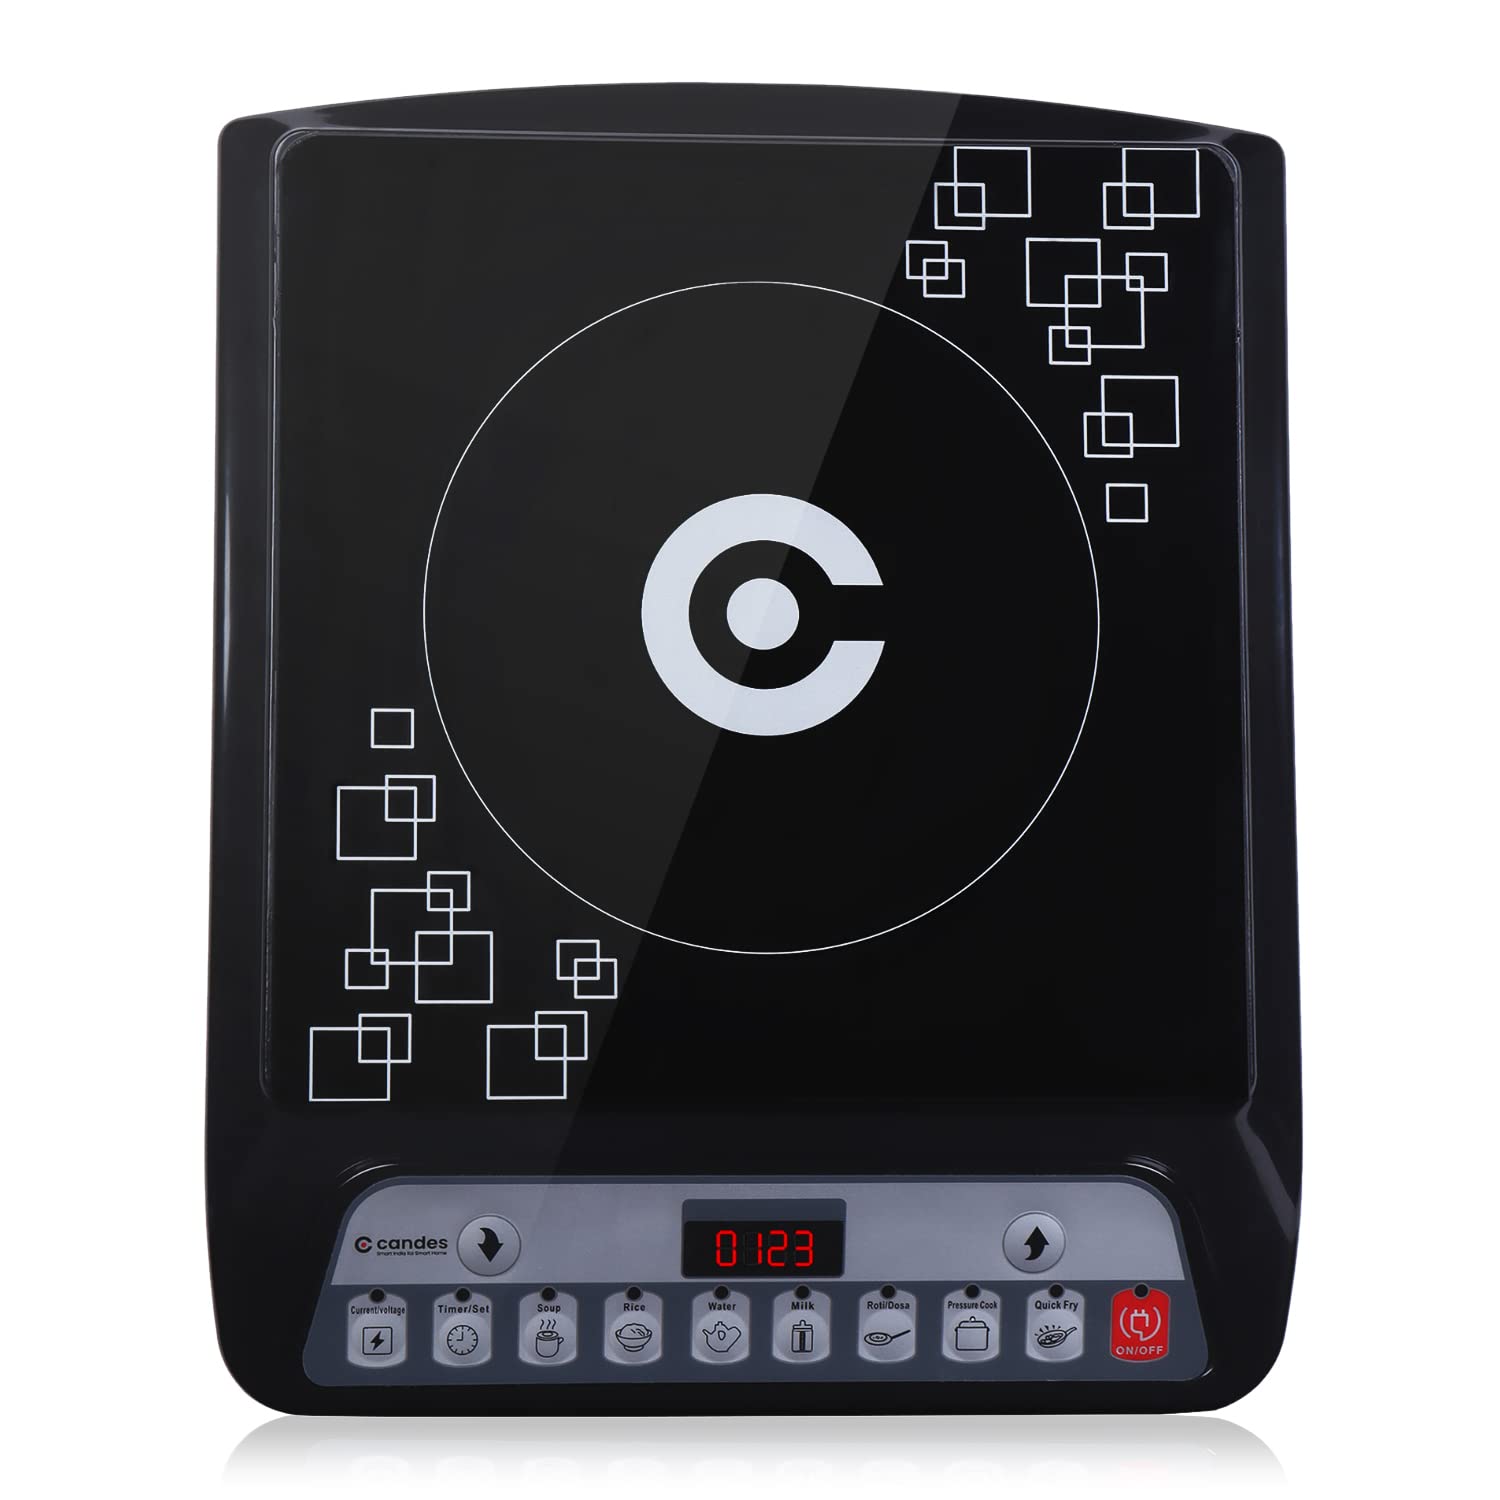 PIND03 - WOK TOUCH CONTROL induction hob